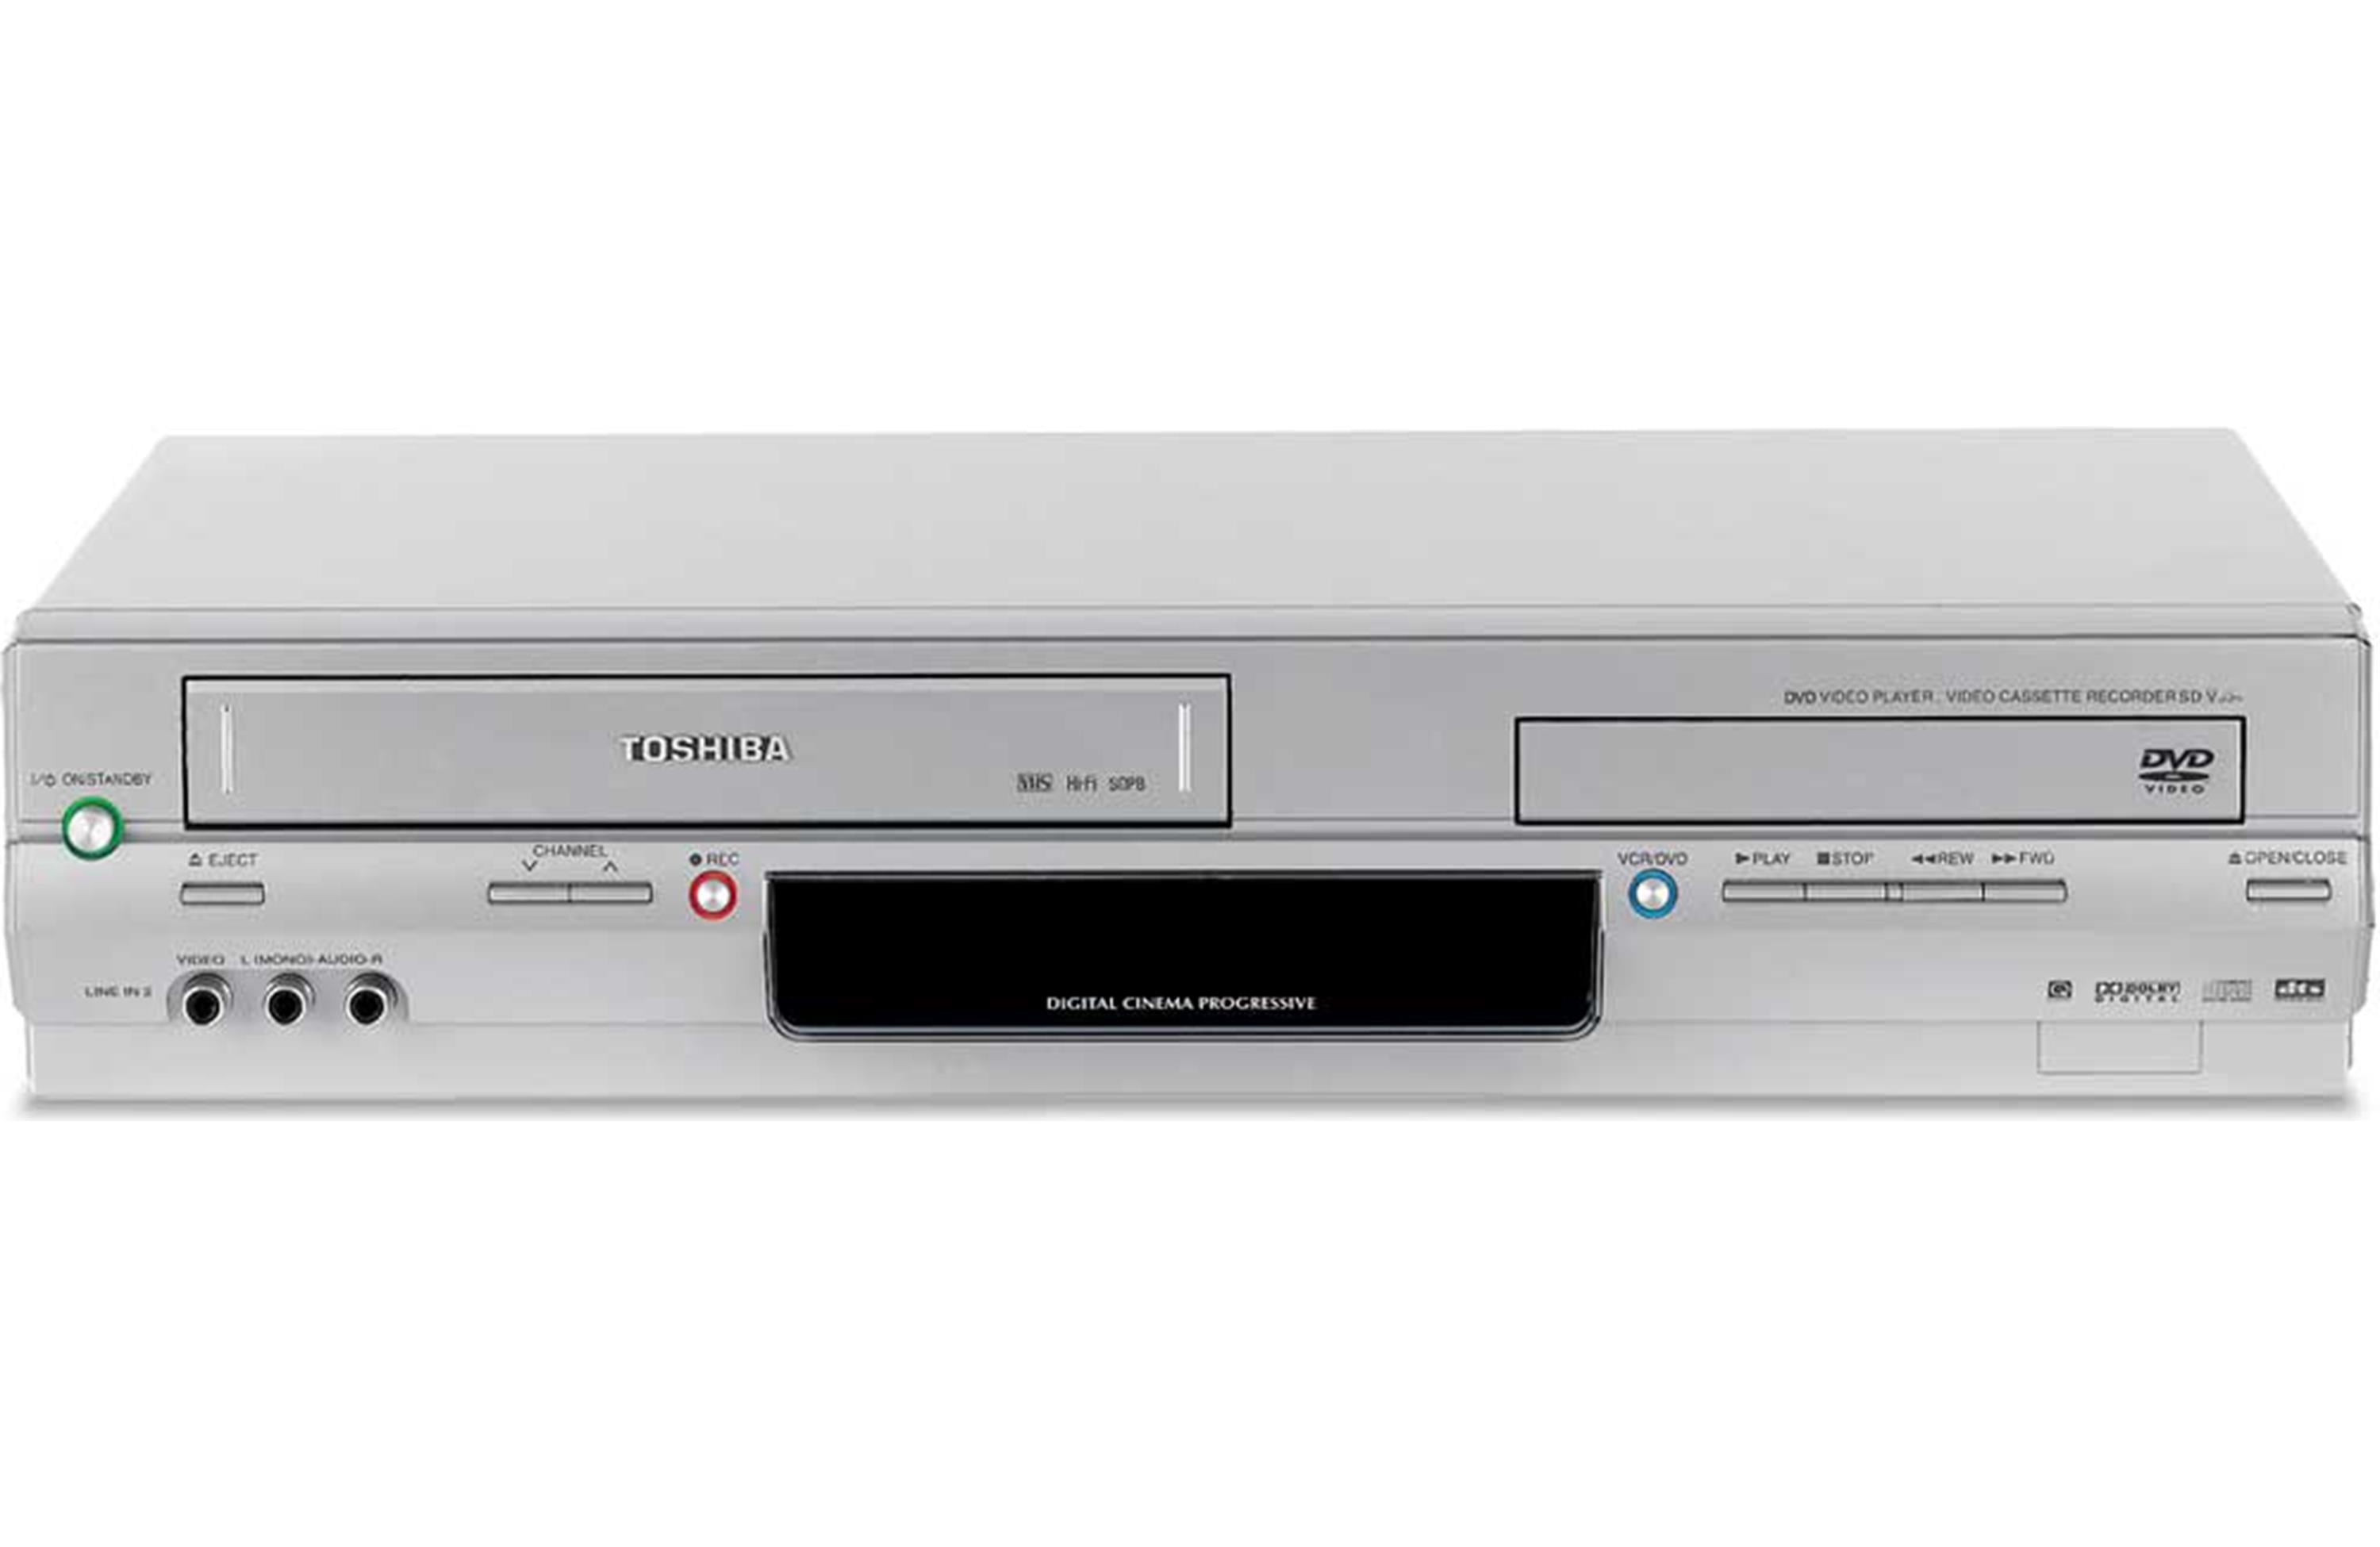 TOSHIBA SD-V394 (USed) DVD VCR Combo with MANUAL, and CABLES - Walmart.com